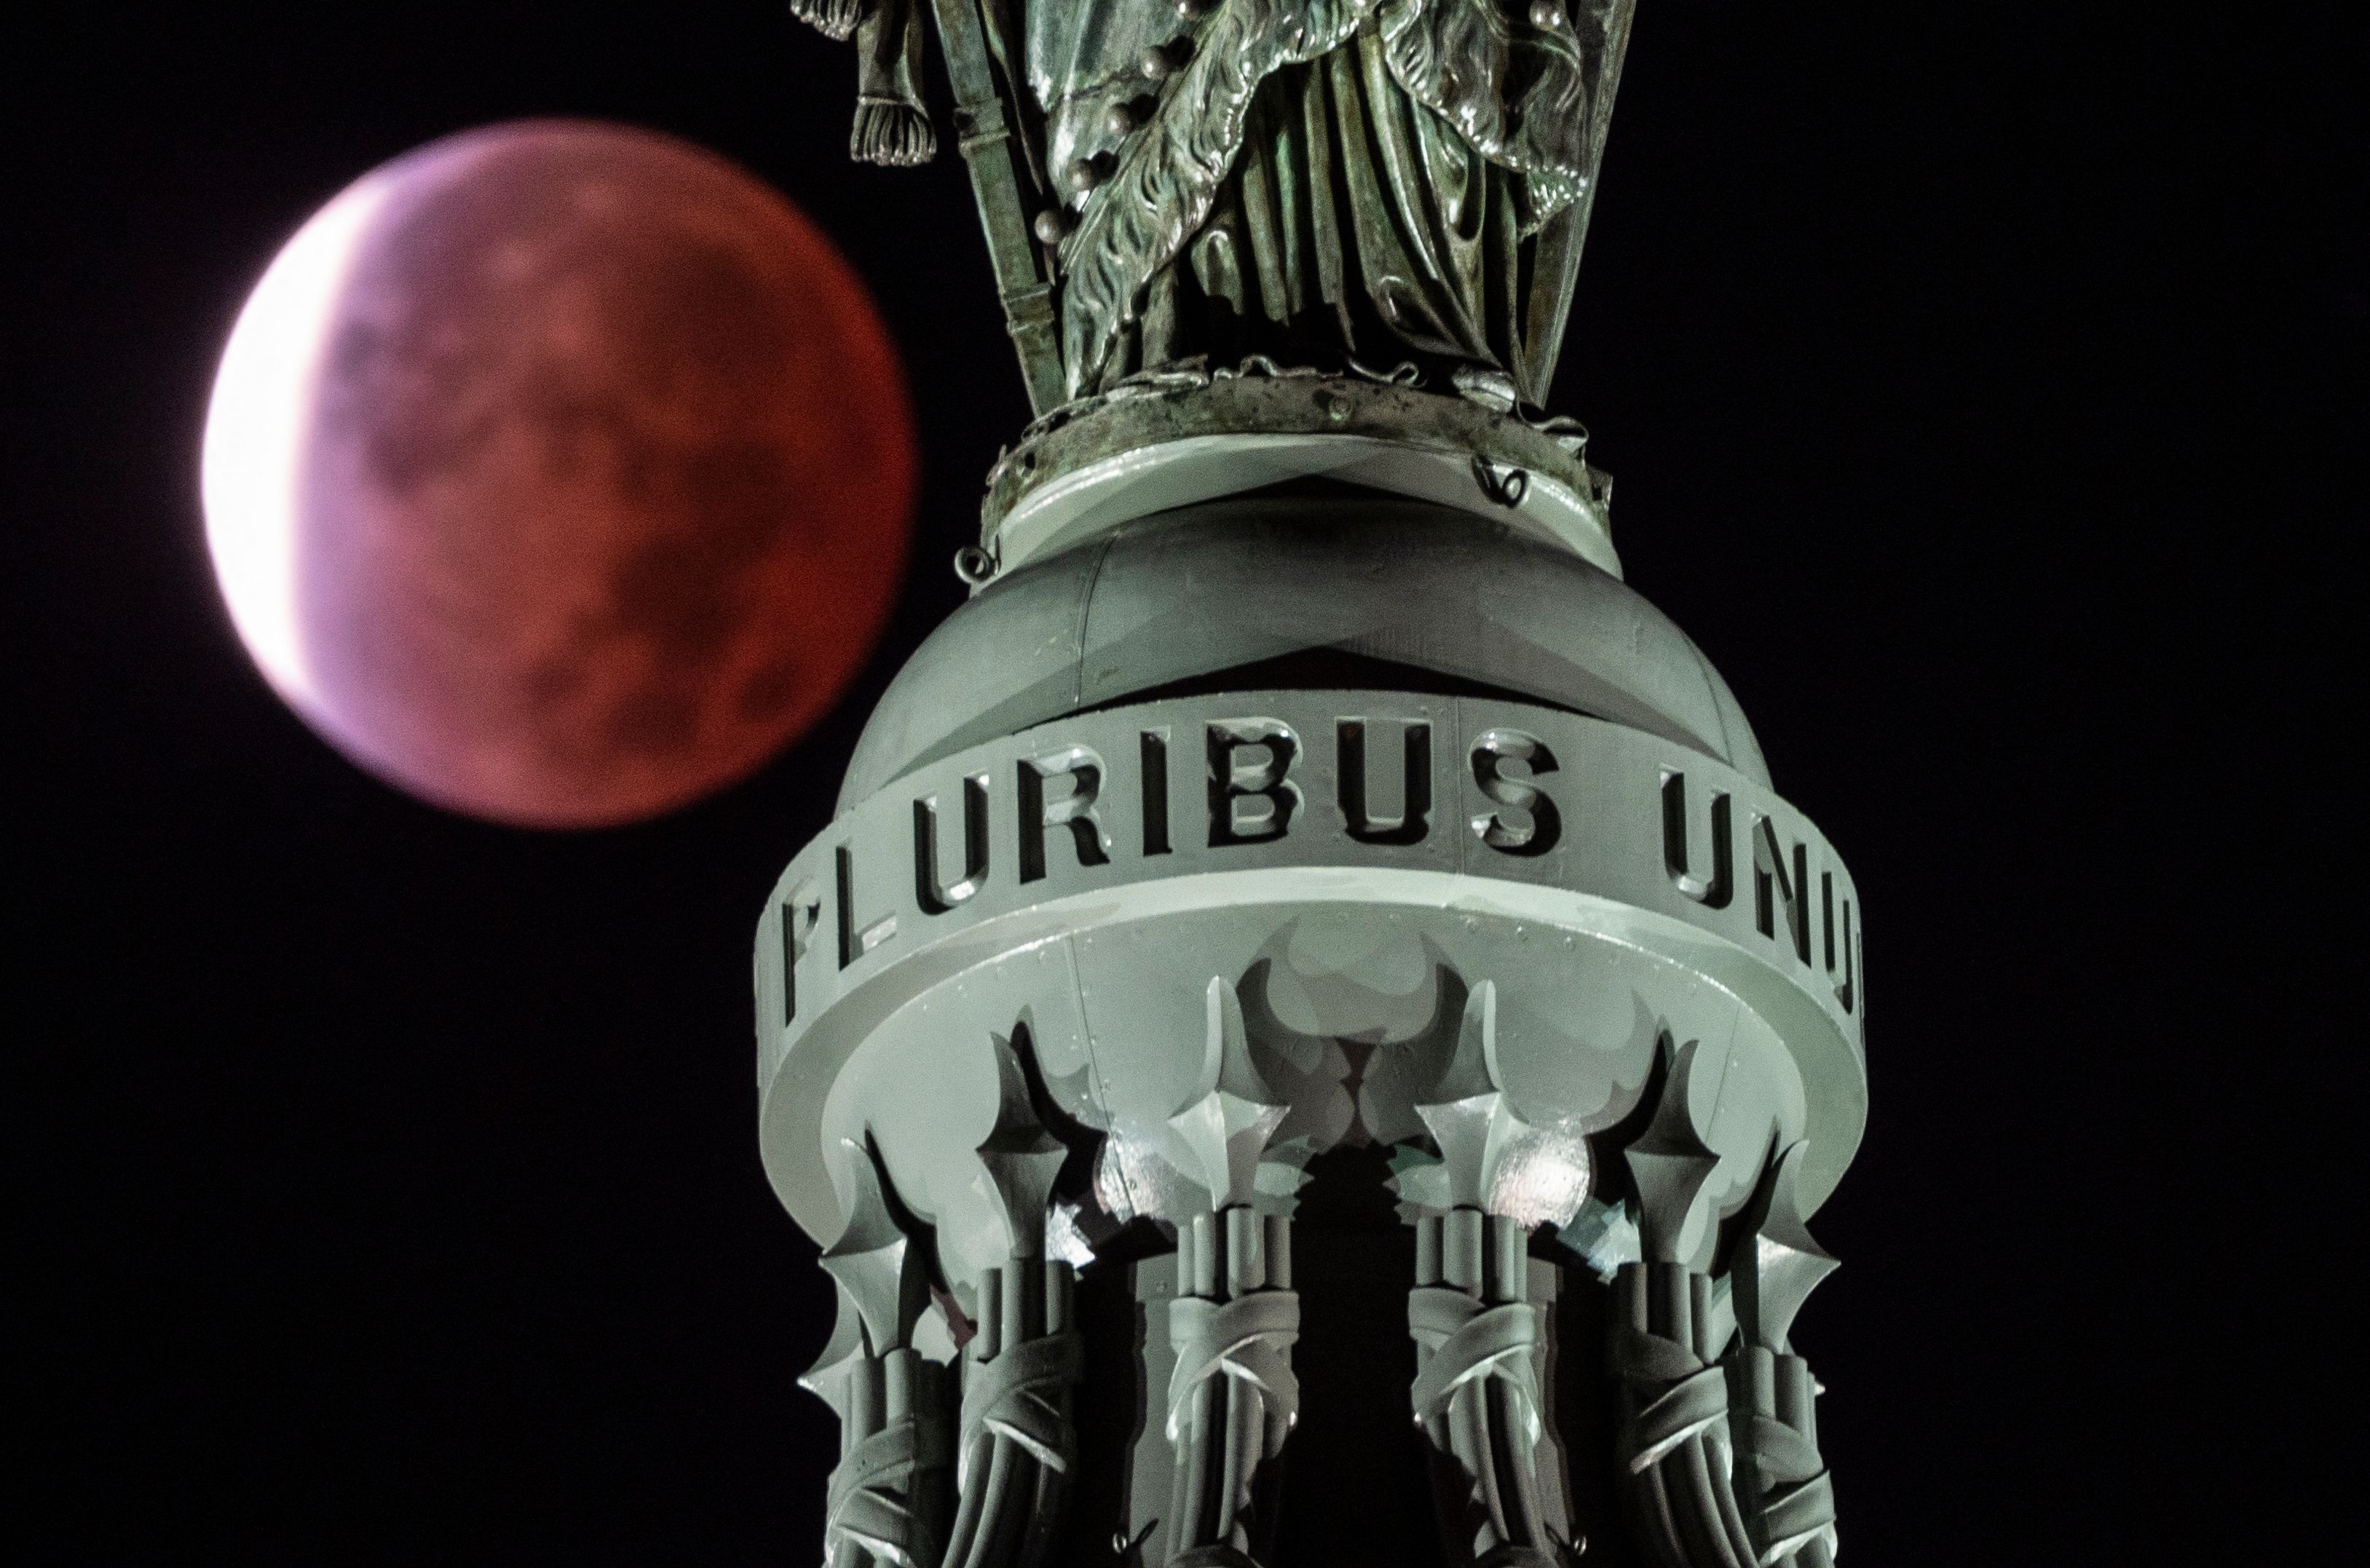 The moon, with a partial lunar eclipse, is seen behind the writing E Pluribus Unum, latin for "Out of many, one" on the Statue of Freedom at the top of the dome on Capitol Hill in Washington, DC early on November 19, 2021.